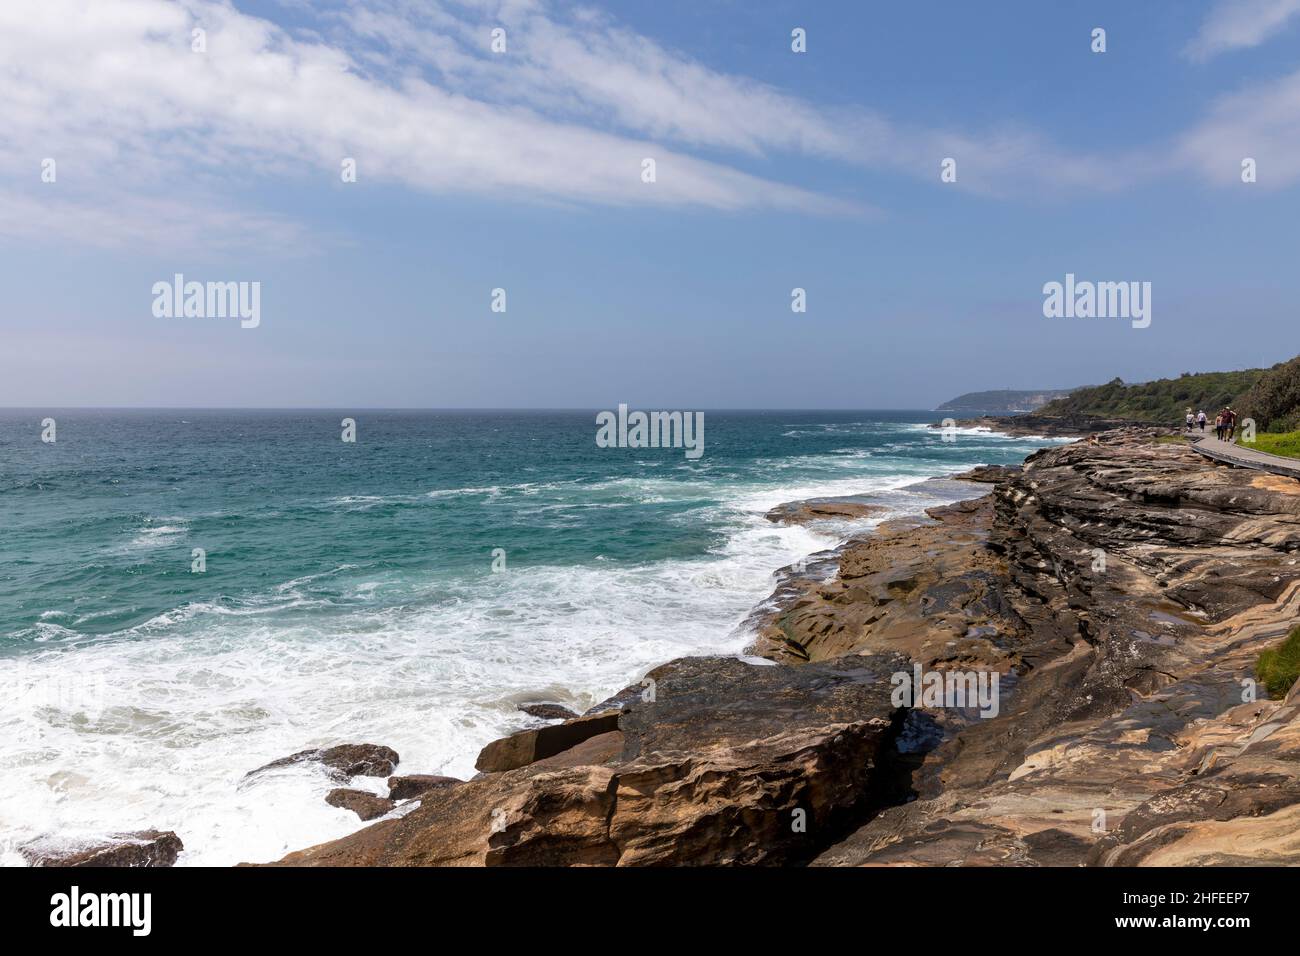 Curl Curl boardwalk renamed Harry Eliffe Way between Curl Curl and Freshwater Sydney gives dramatic coastal views, tsunami warning issued today jan 22 Stock Photo